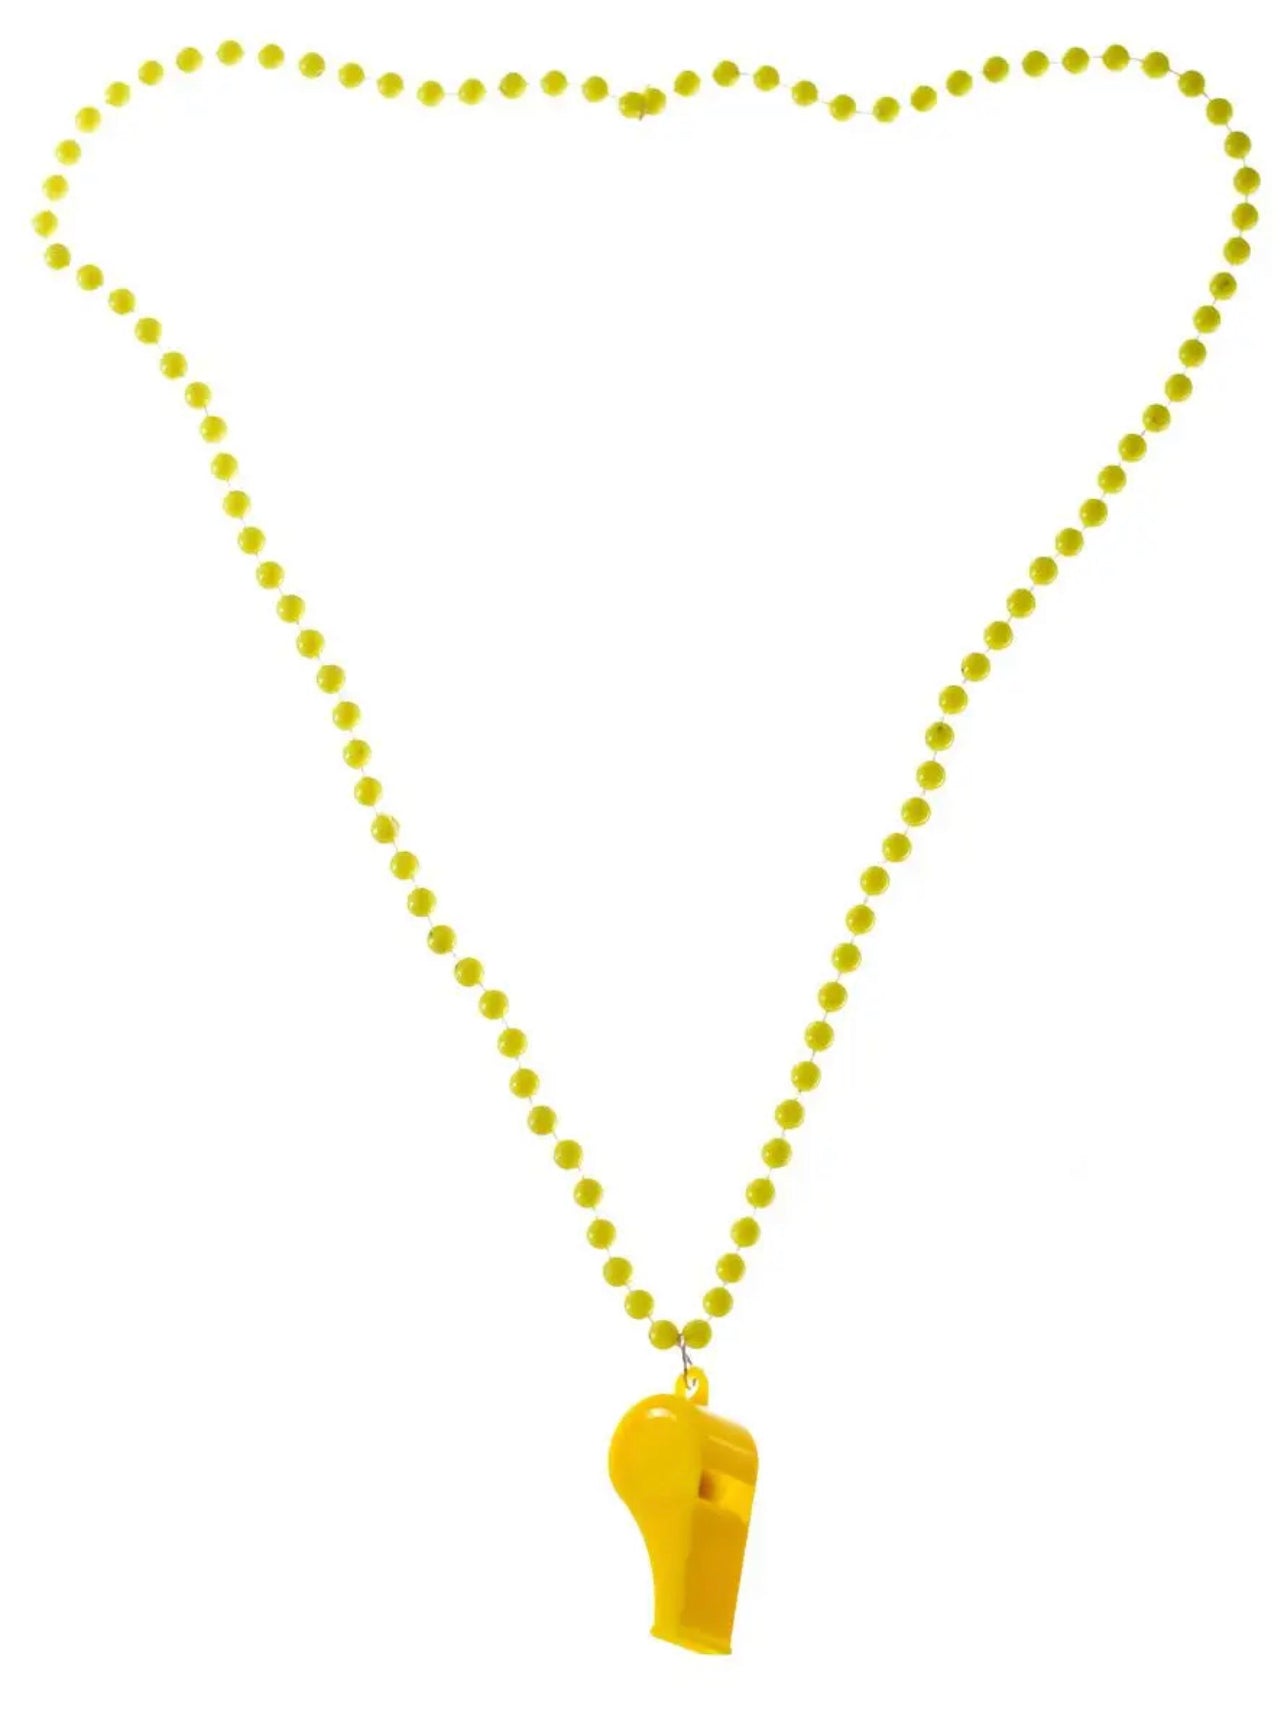 YELLOW WHISTLE ON CHAIN